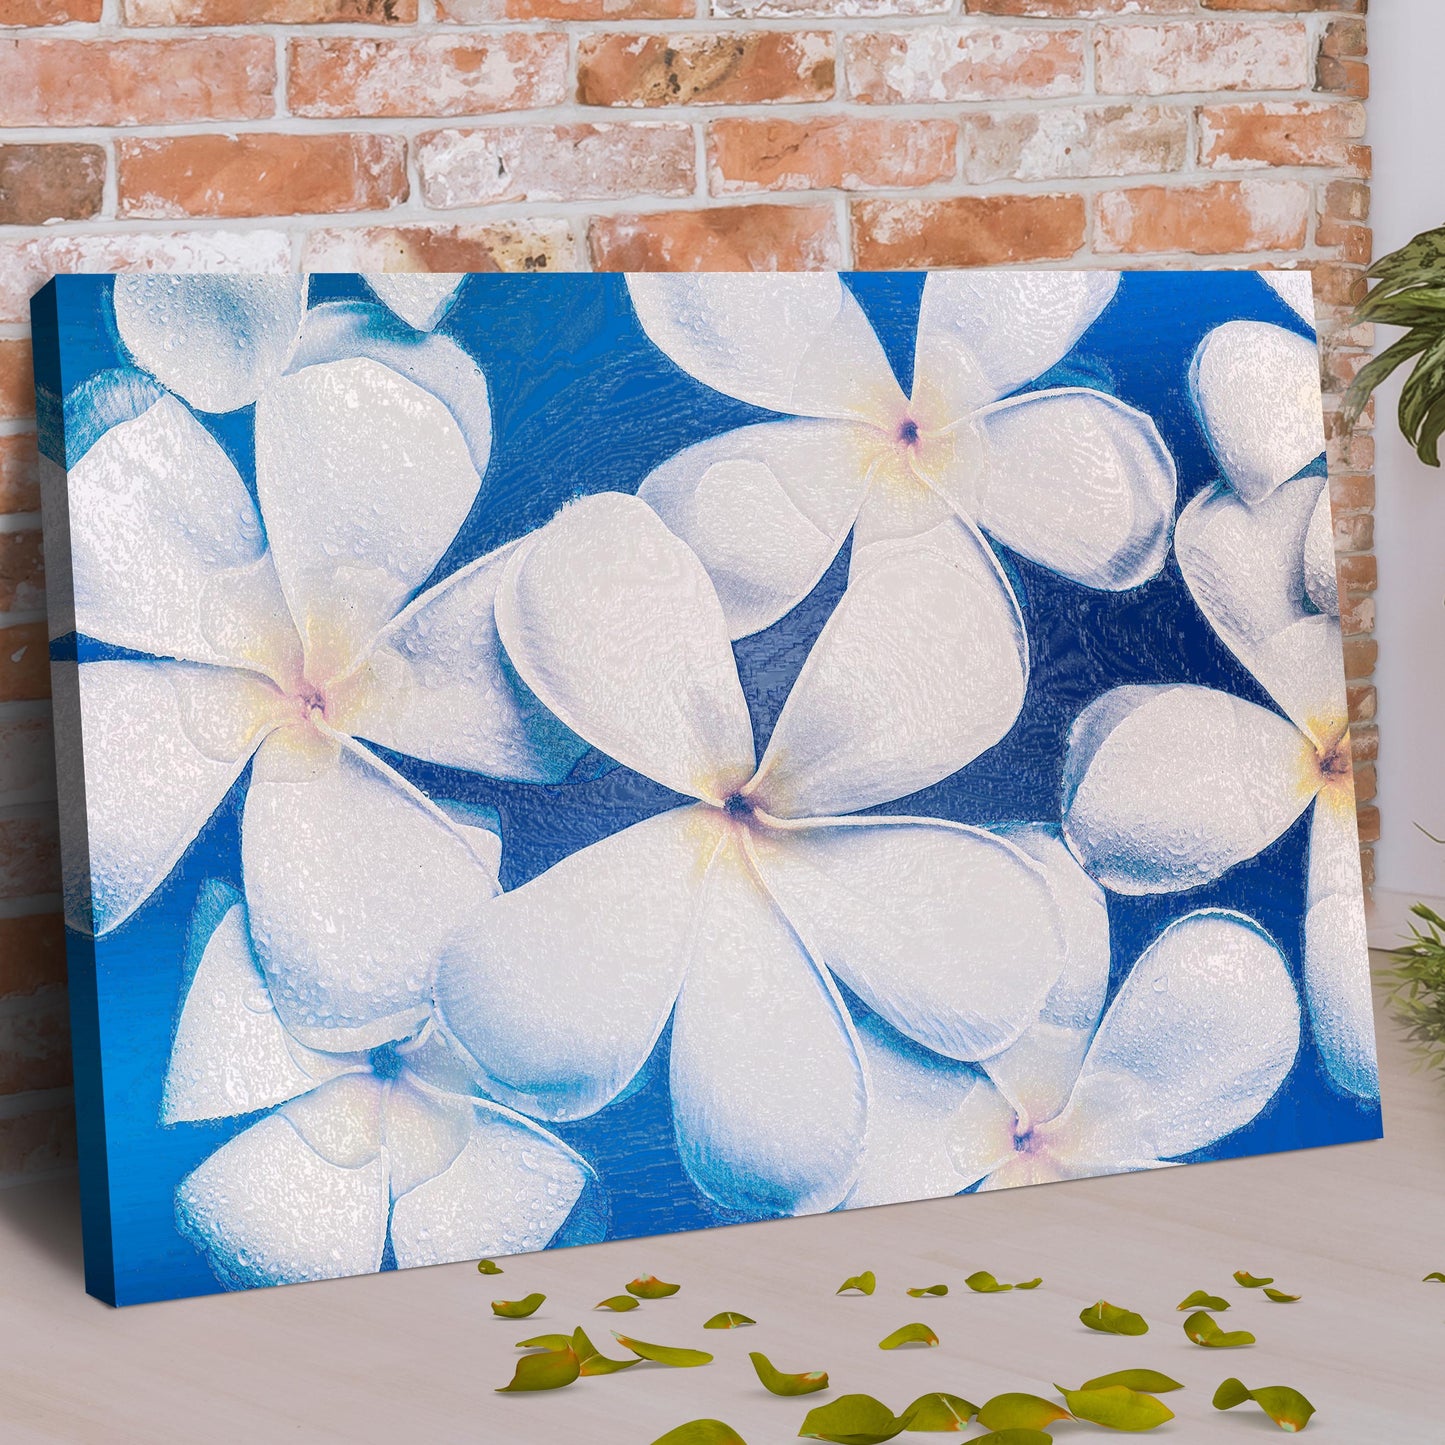 Bright White Frangipani Canvas Wall Art Style 1 - Image by Tailored Canvases